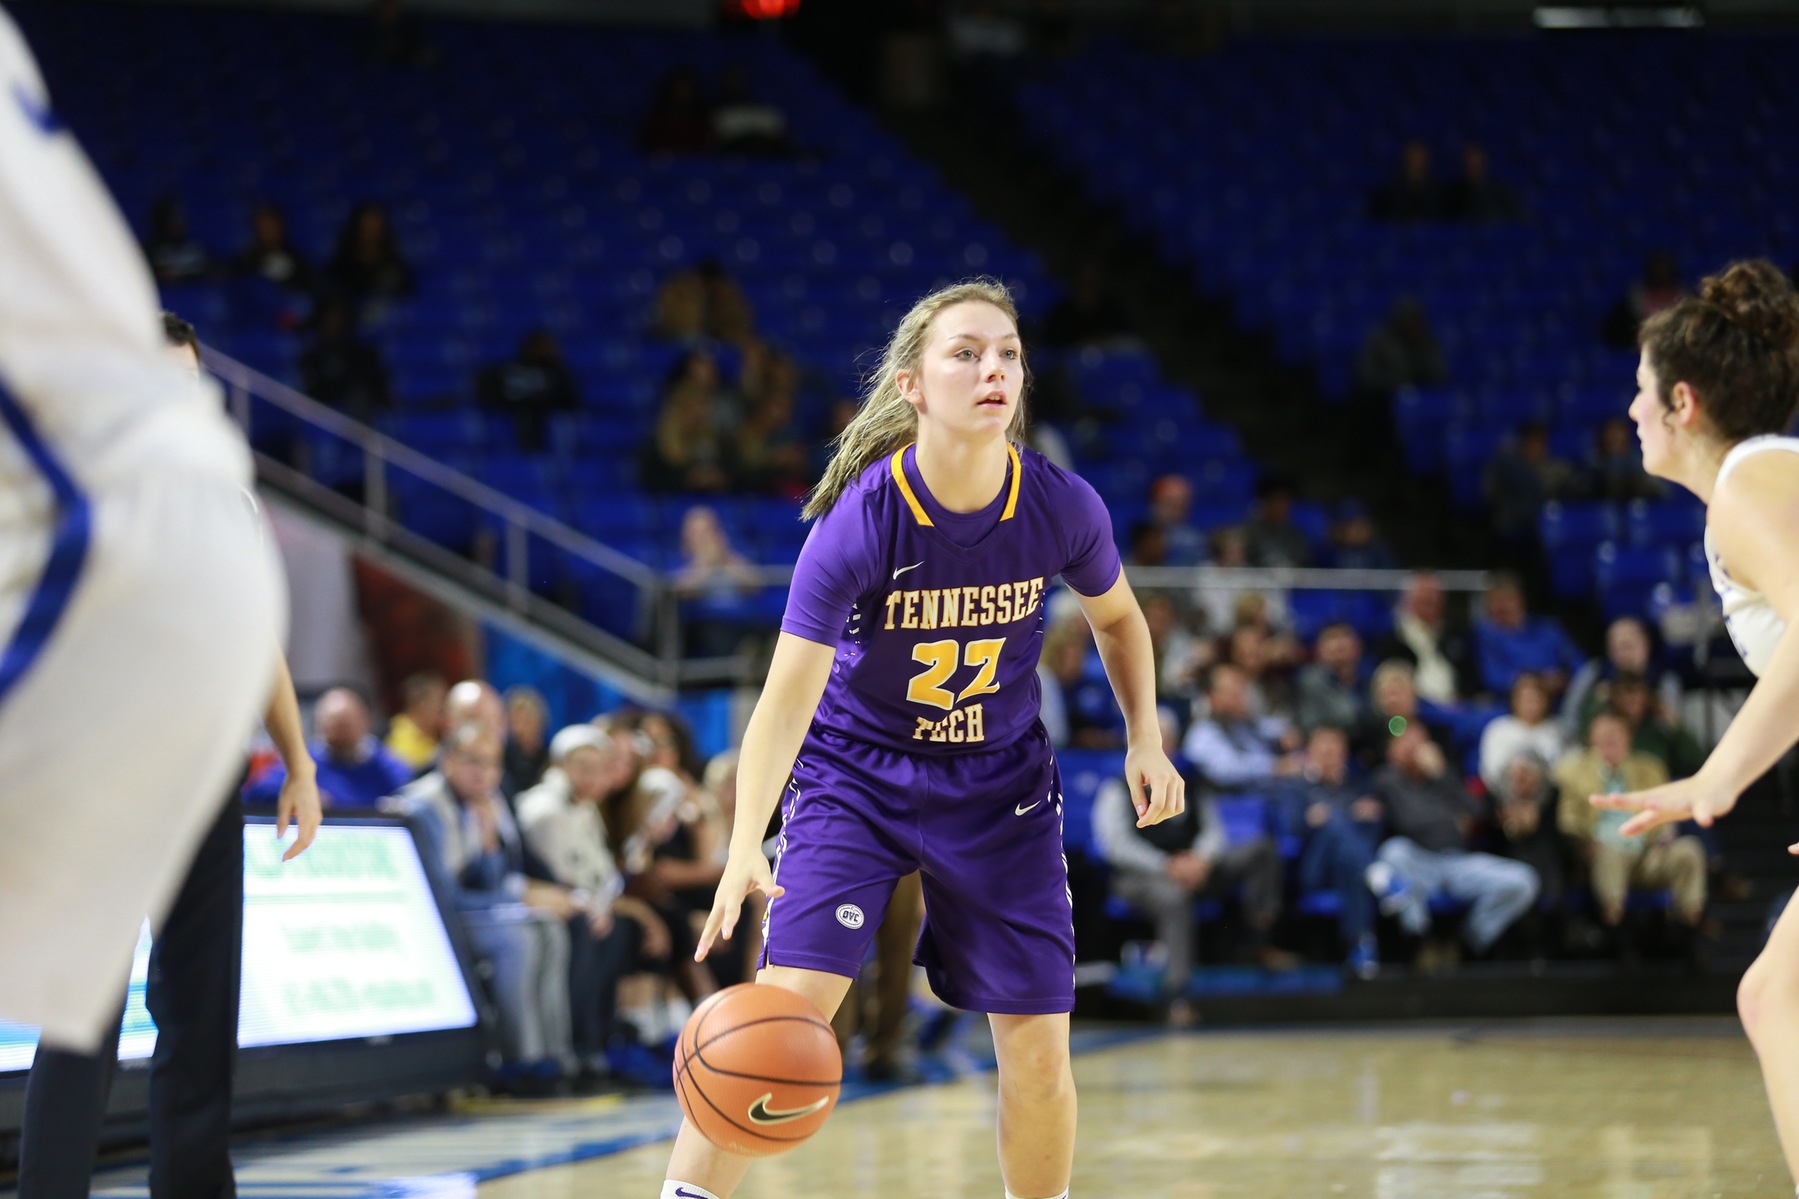 Tech to face Radford at home in final game before Thanksgiving